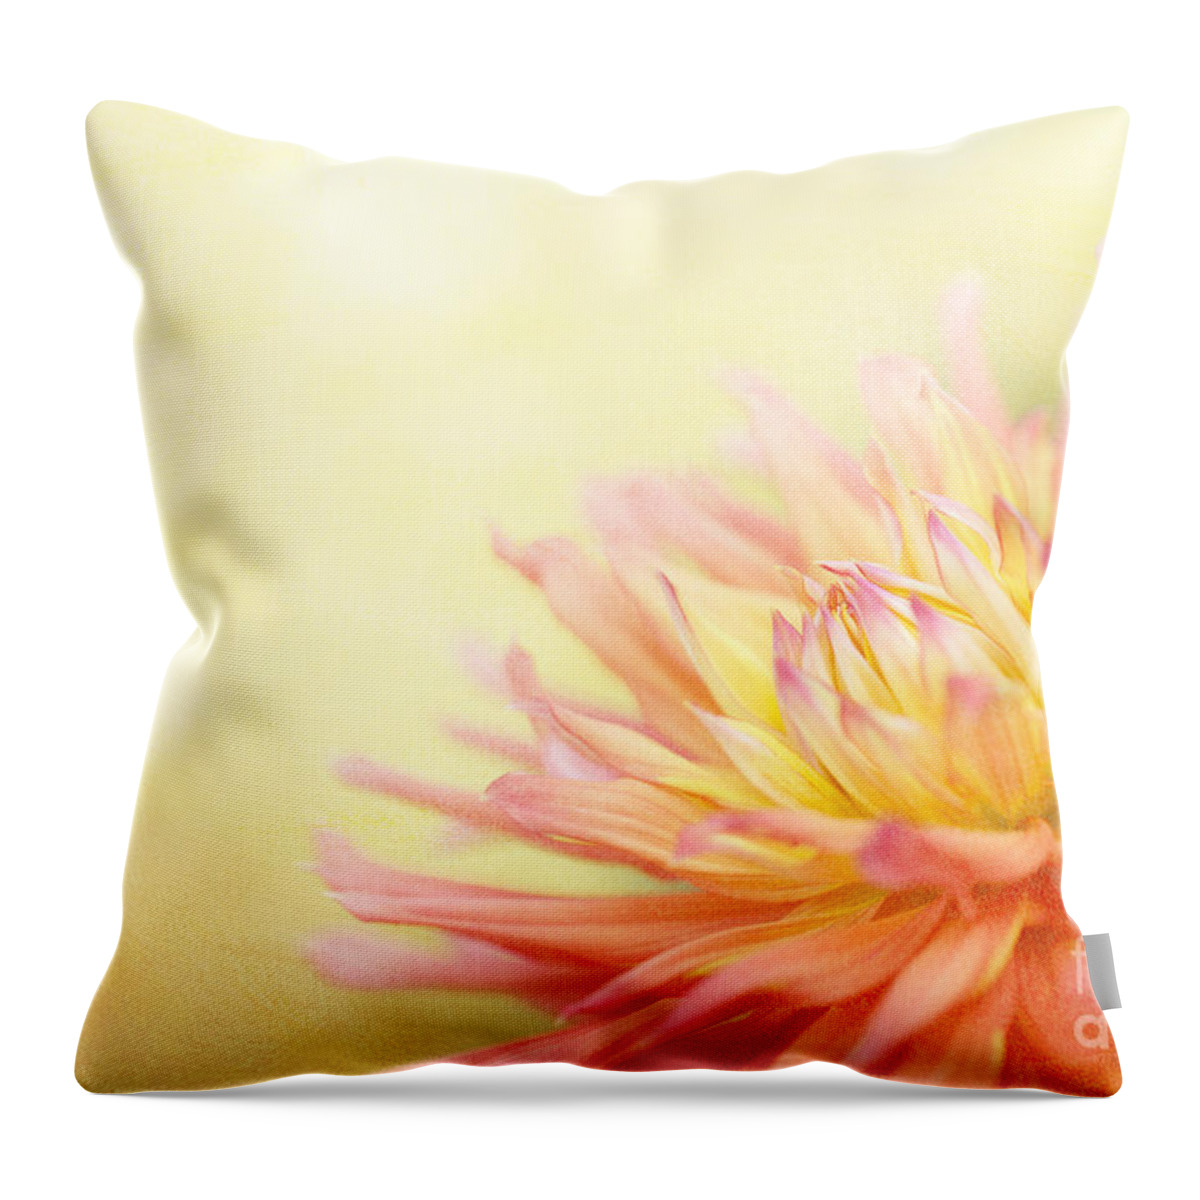 Dahlia Throw Pillow featuring the photograph Color Me Happy by Beve Brown-Clark Photography